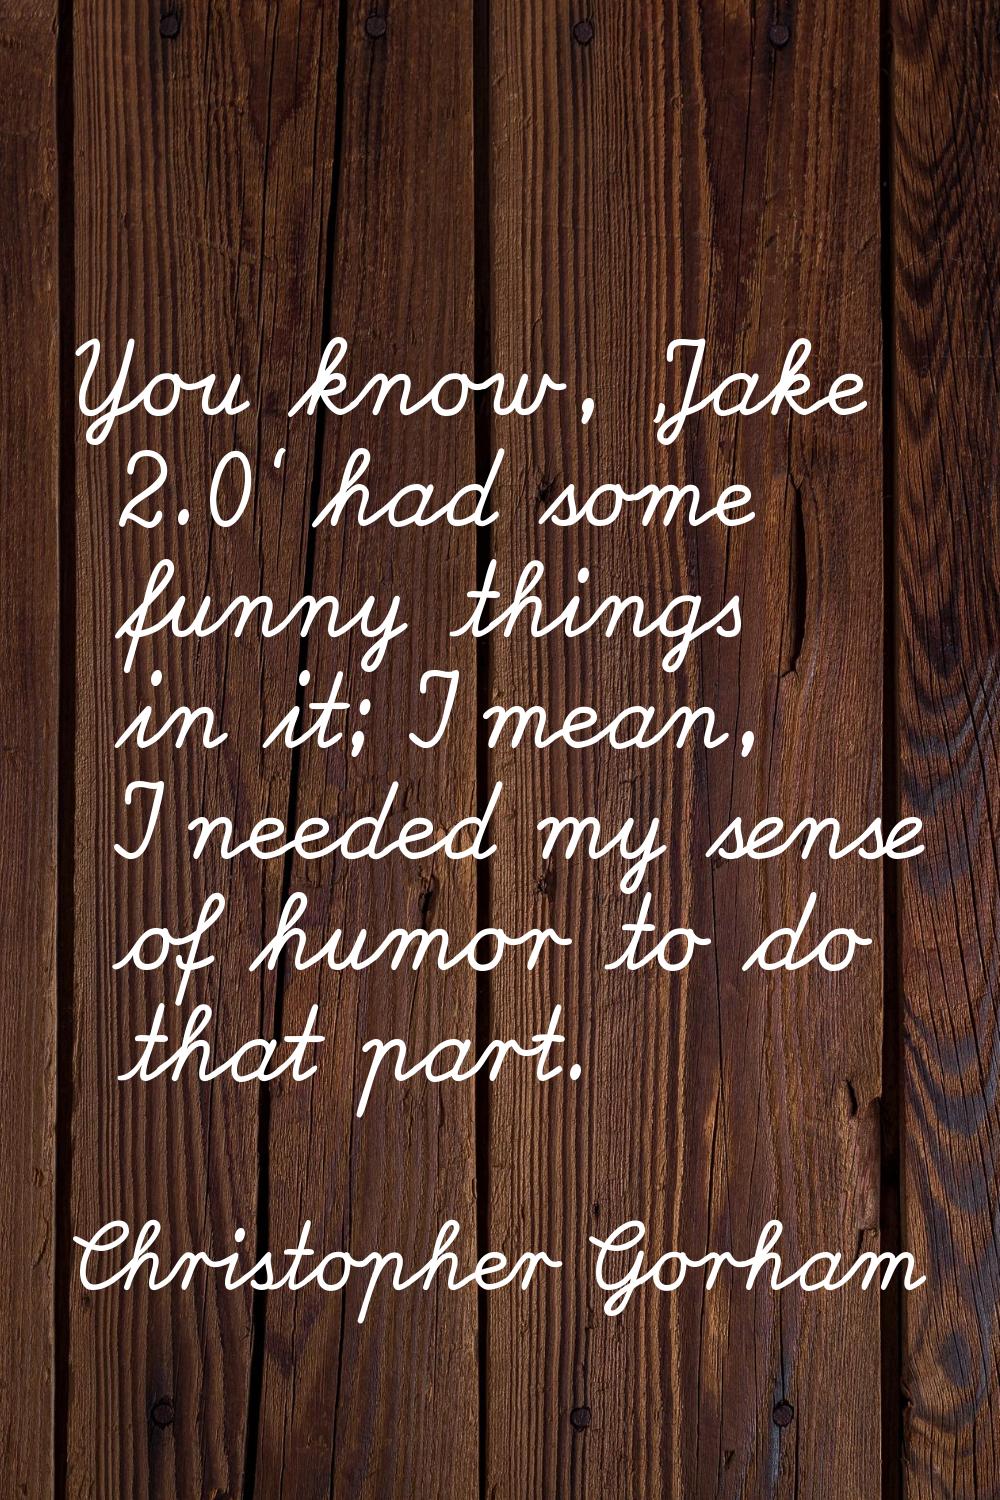 You know, 'Jake 2.0' had some funny things in it; I mean, I needed my sense of humor to do that par